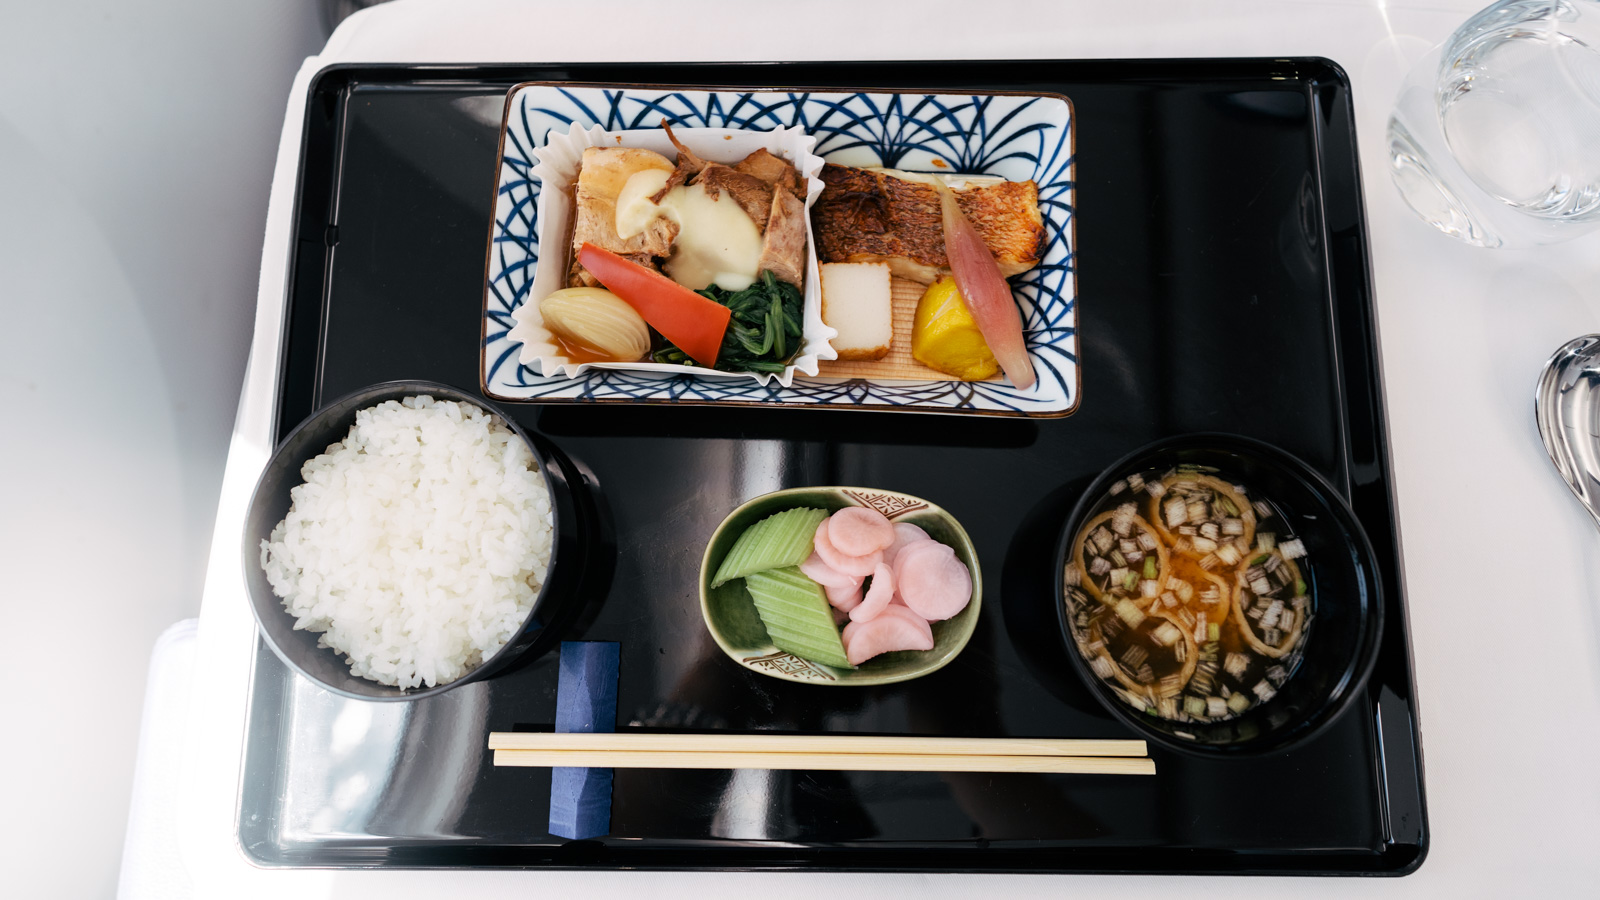 ANA Boeing 787-9 Business Class rice miso soup